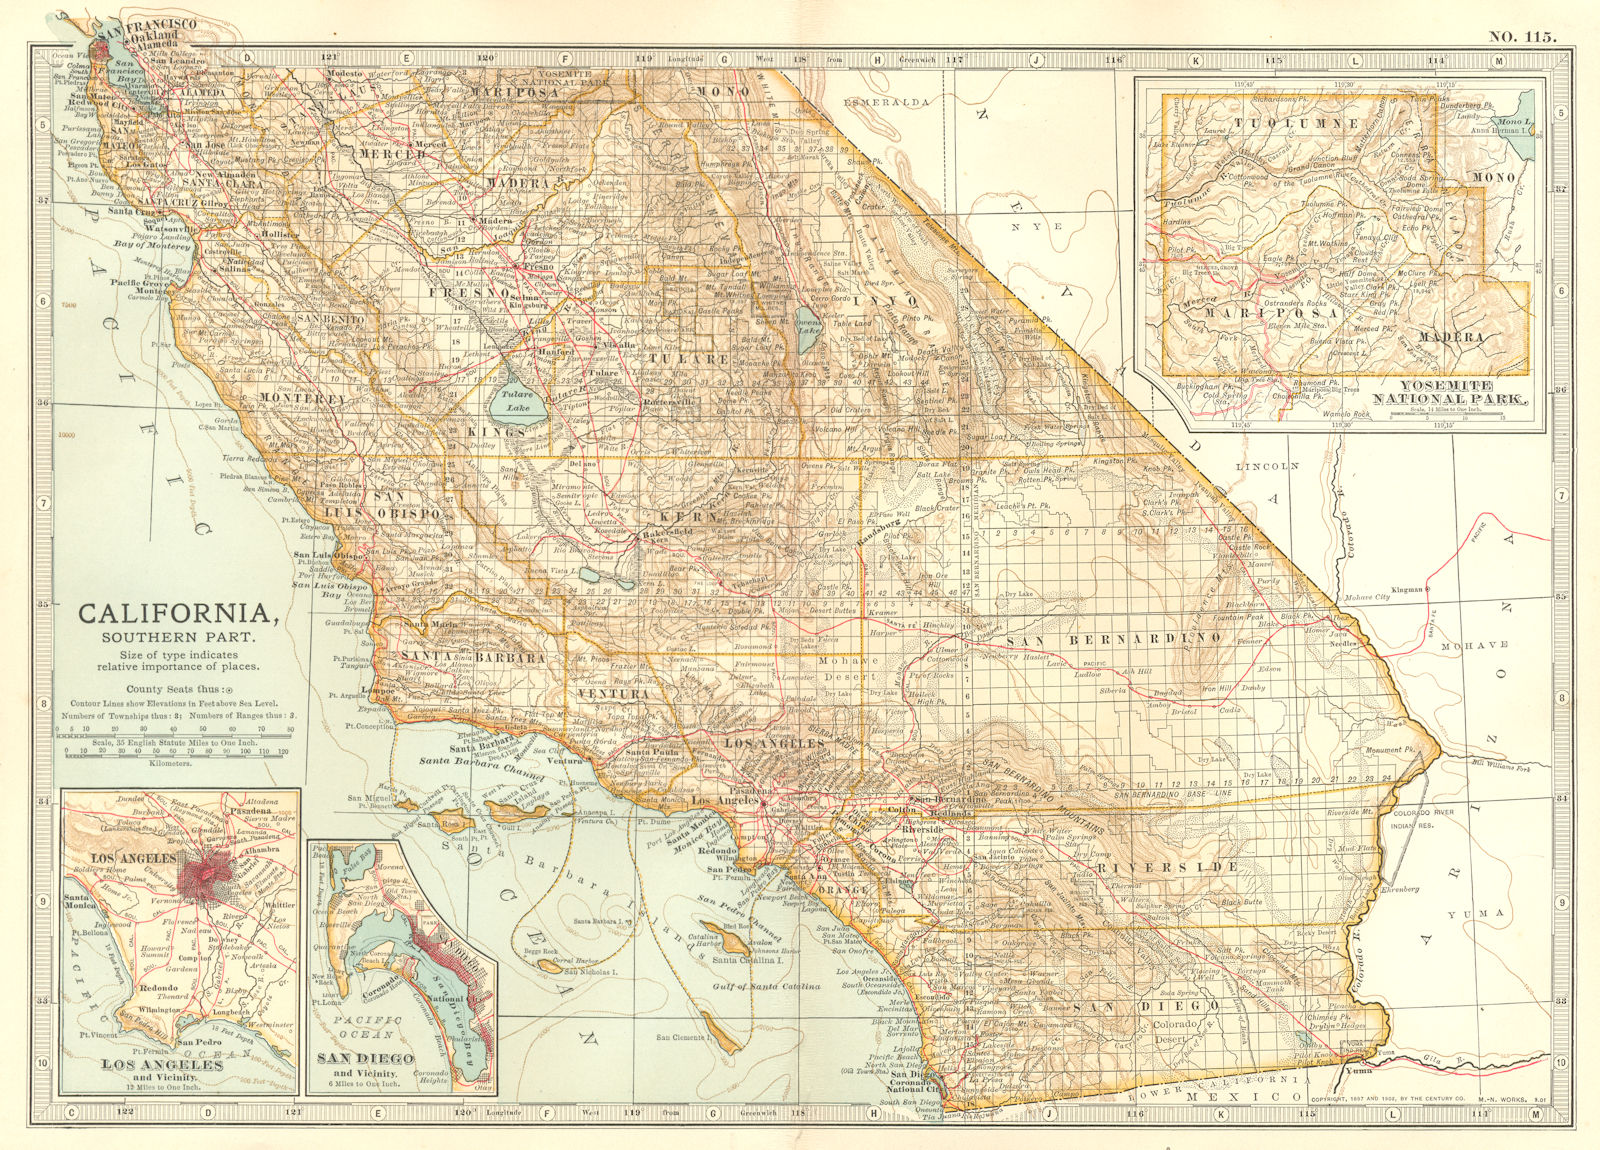 CALIFORNIA. South; Los Angeles, San Diego, Yosemite national park 1903 old map